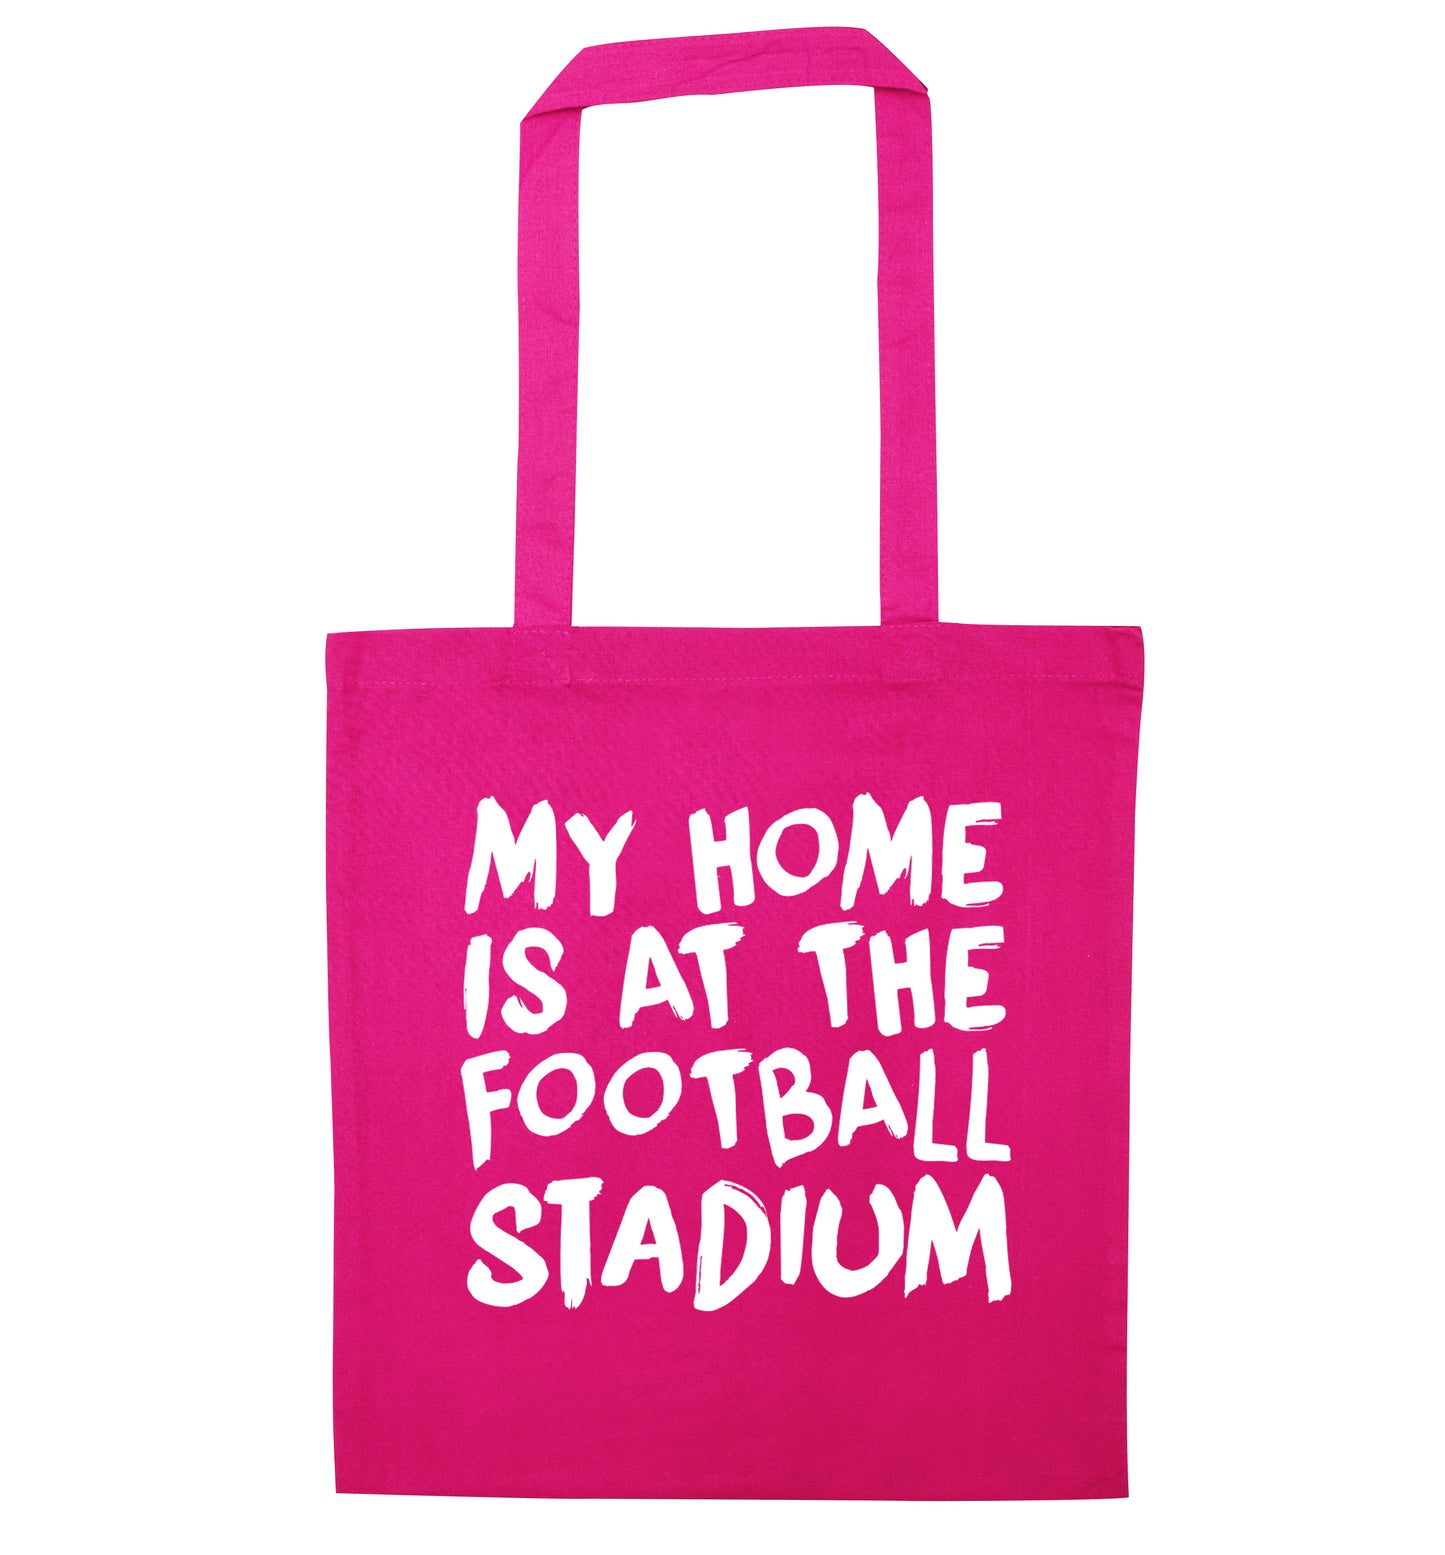 My home is at the football stadium pink tote bag